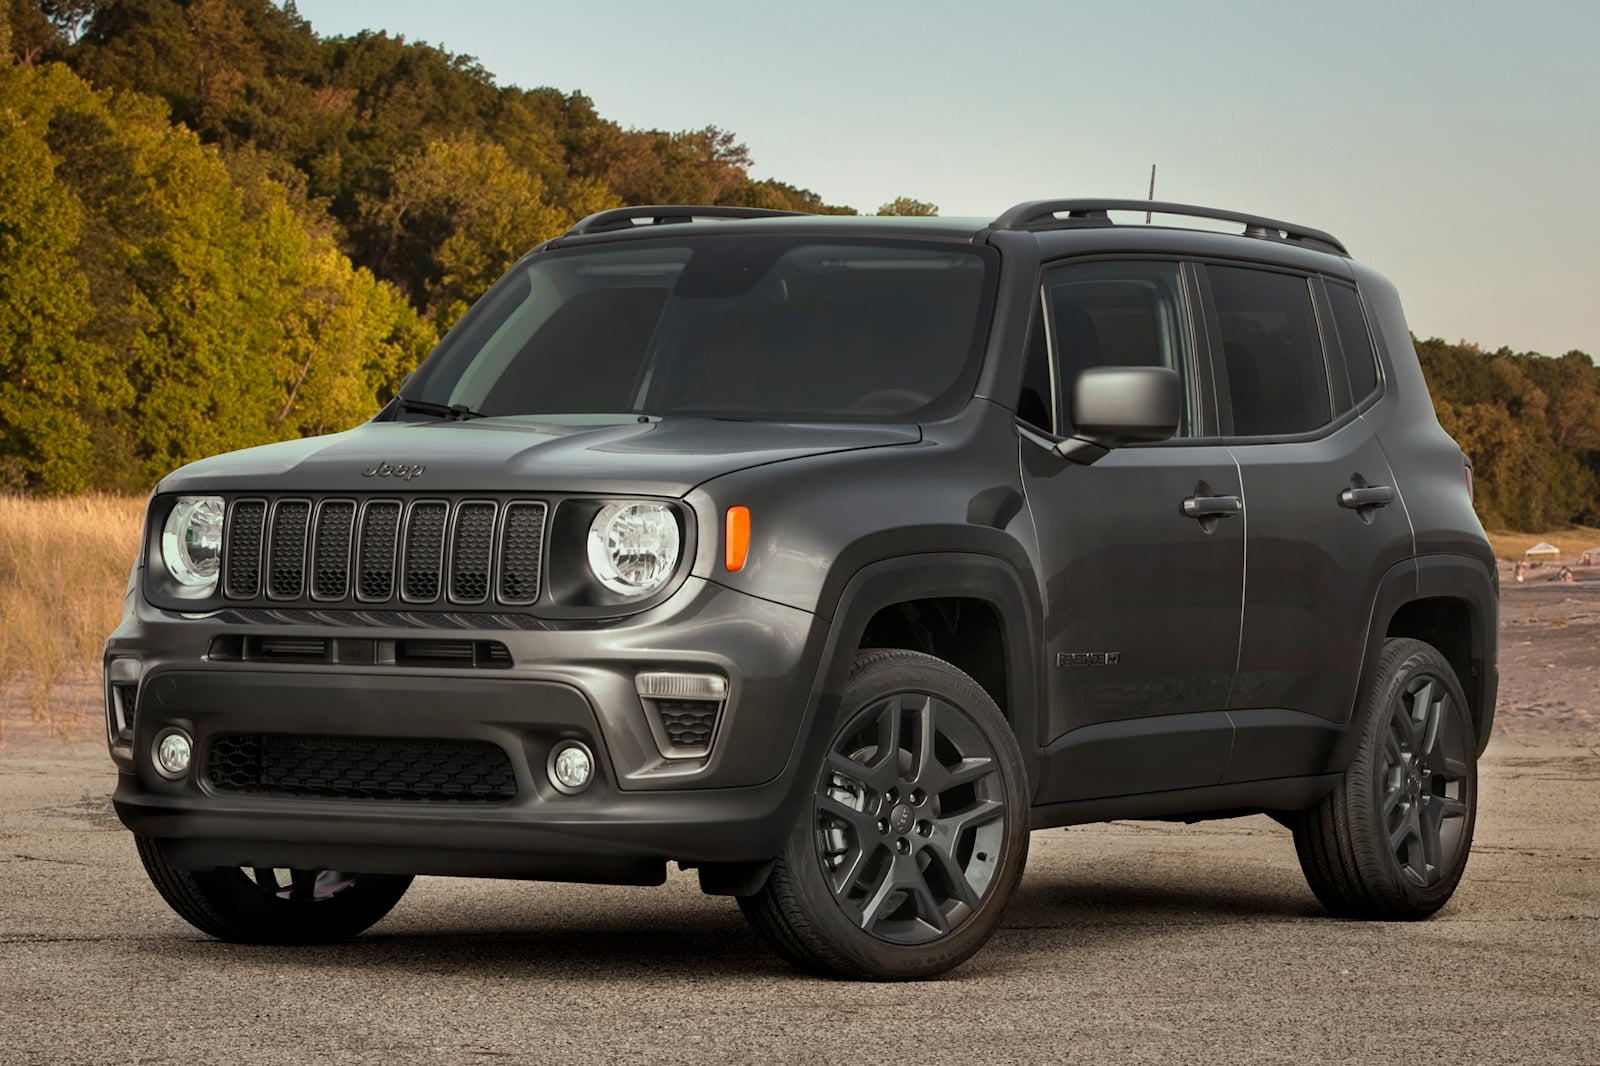 Jeep Renegade Generations: All Model Years